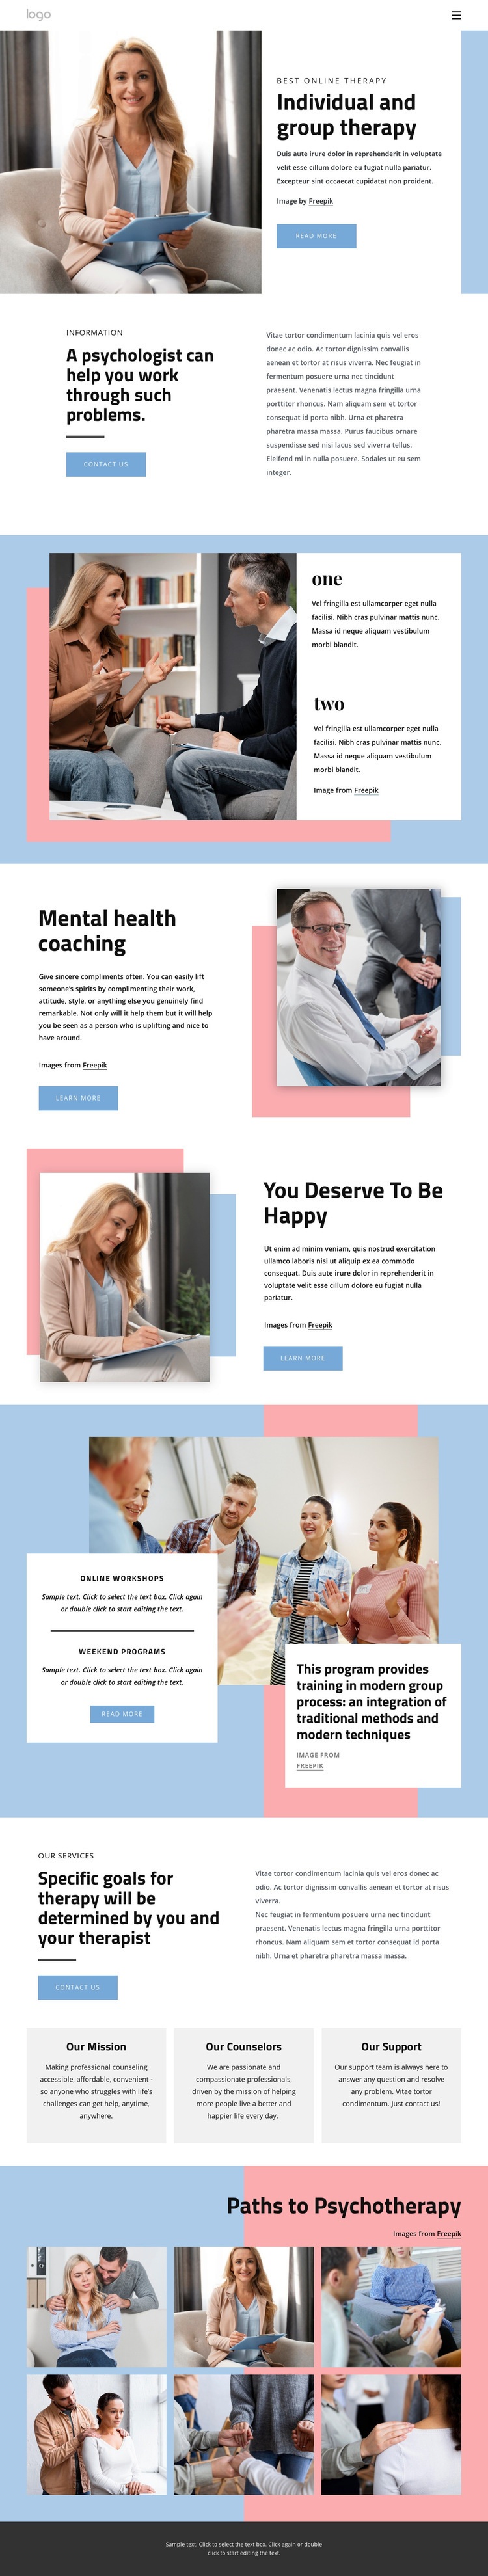 Undividual and group therapy Web Page Design